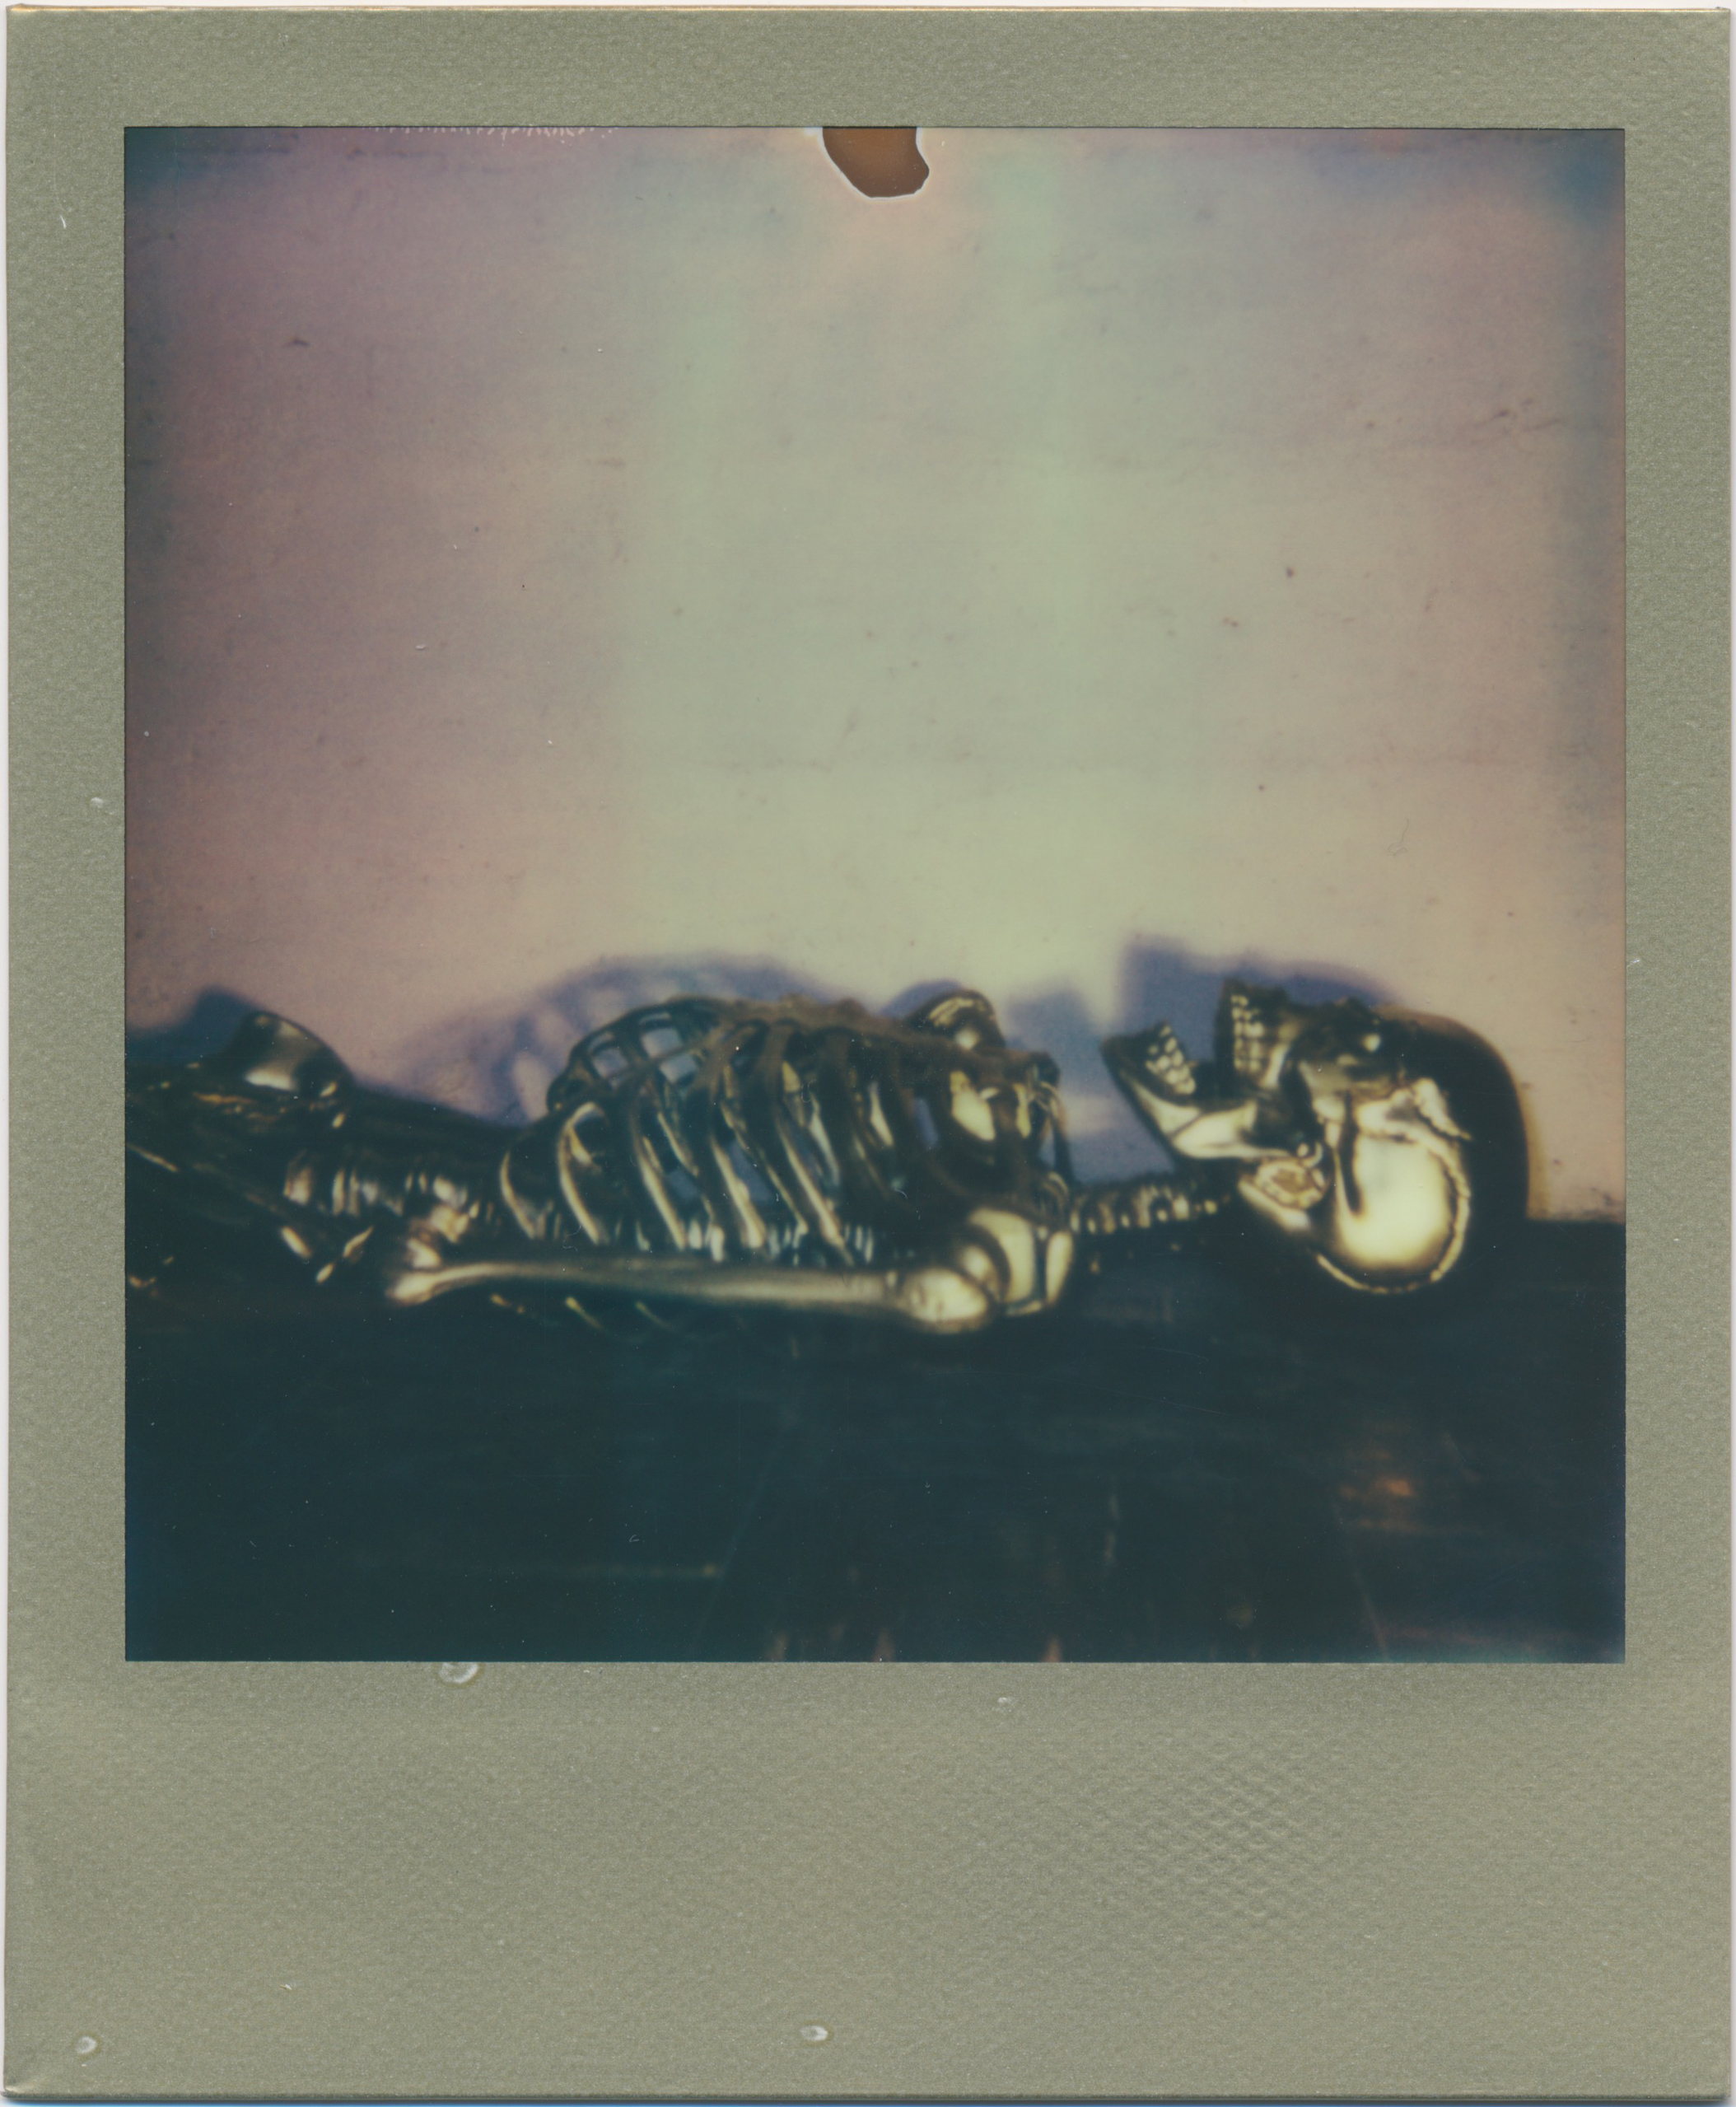   Guilded   2014  Impossible Project 600 Color Shade Gold Edition 